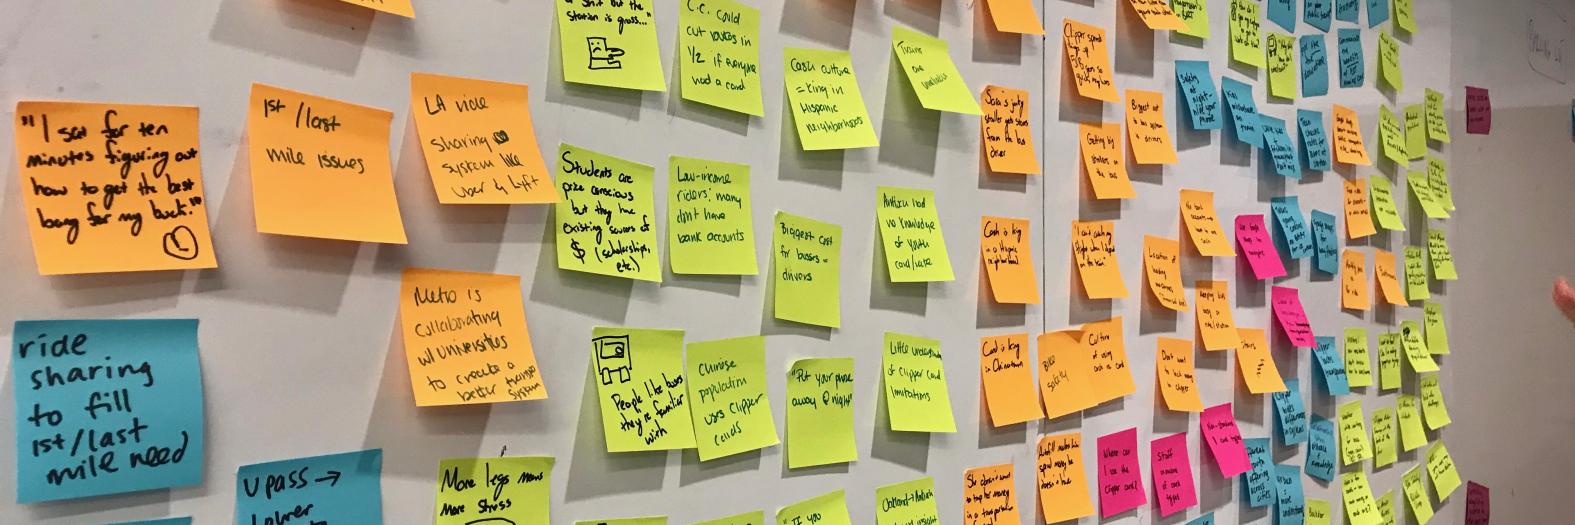 post-its from event